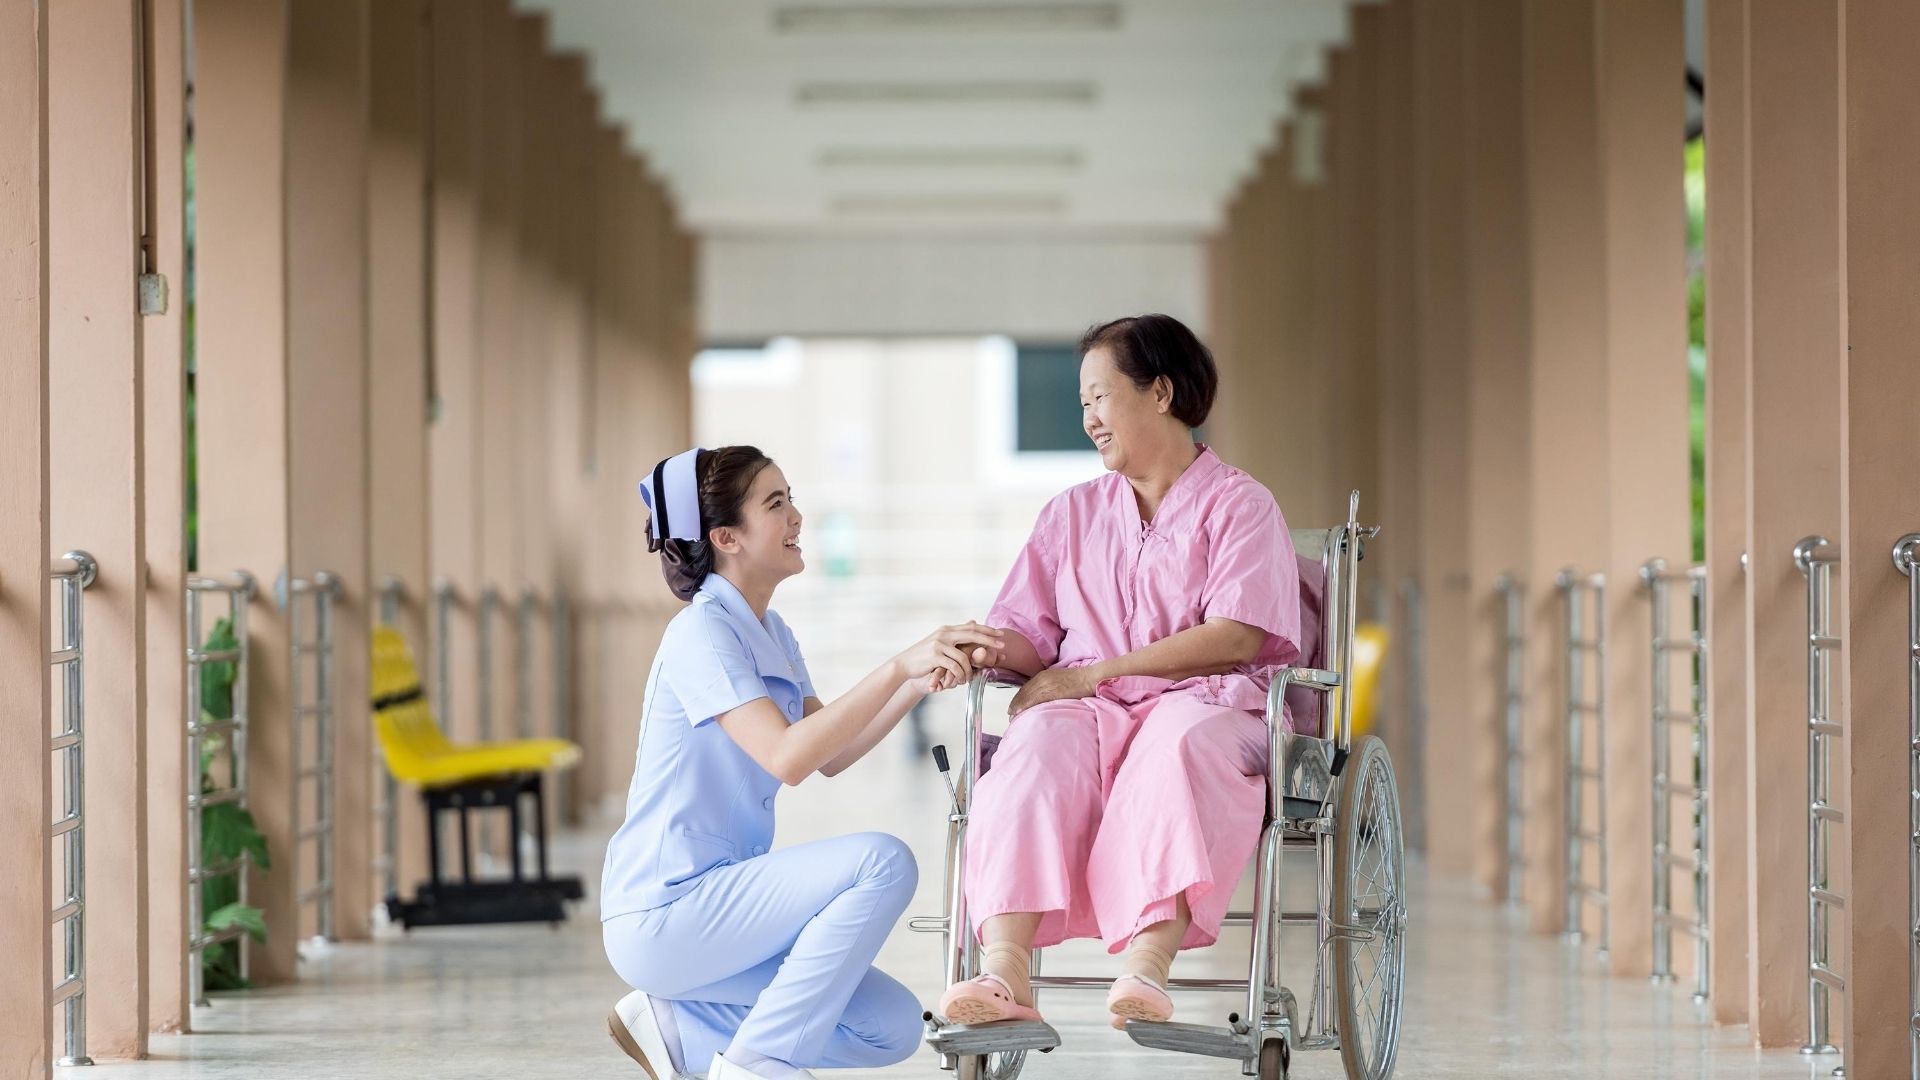 Asian woman in wheelchair smiling, nurse standing by her side in hospital